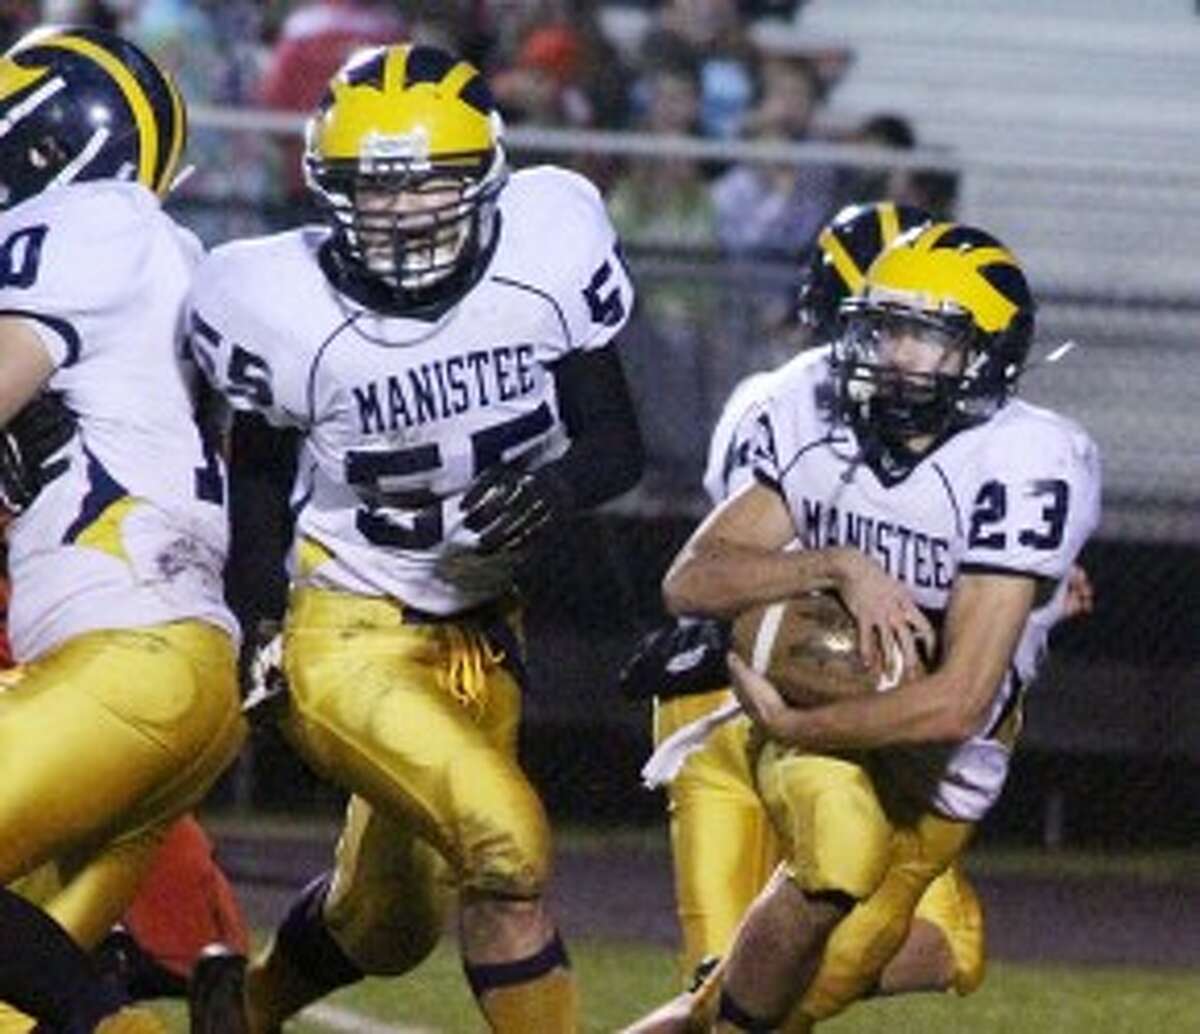 Manistee senior lineman Chris Blevins (55) looks to make a block for running back Nick Williams during a playoff loss to Reed City. Blevins was named first team Academic All-State. (Matt Wenzel/News Advocate file photo)